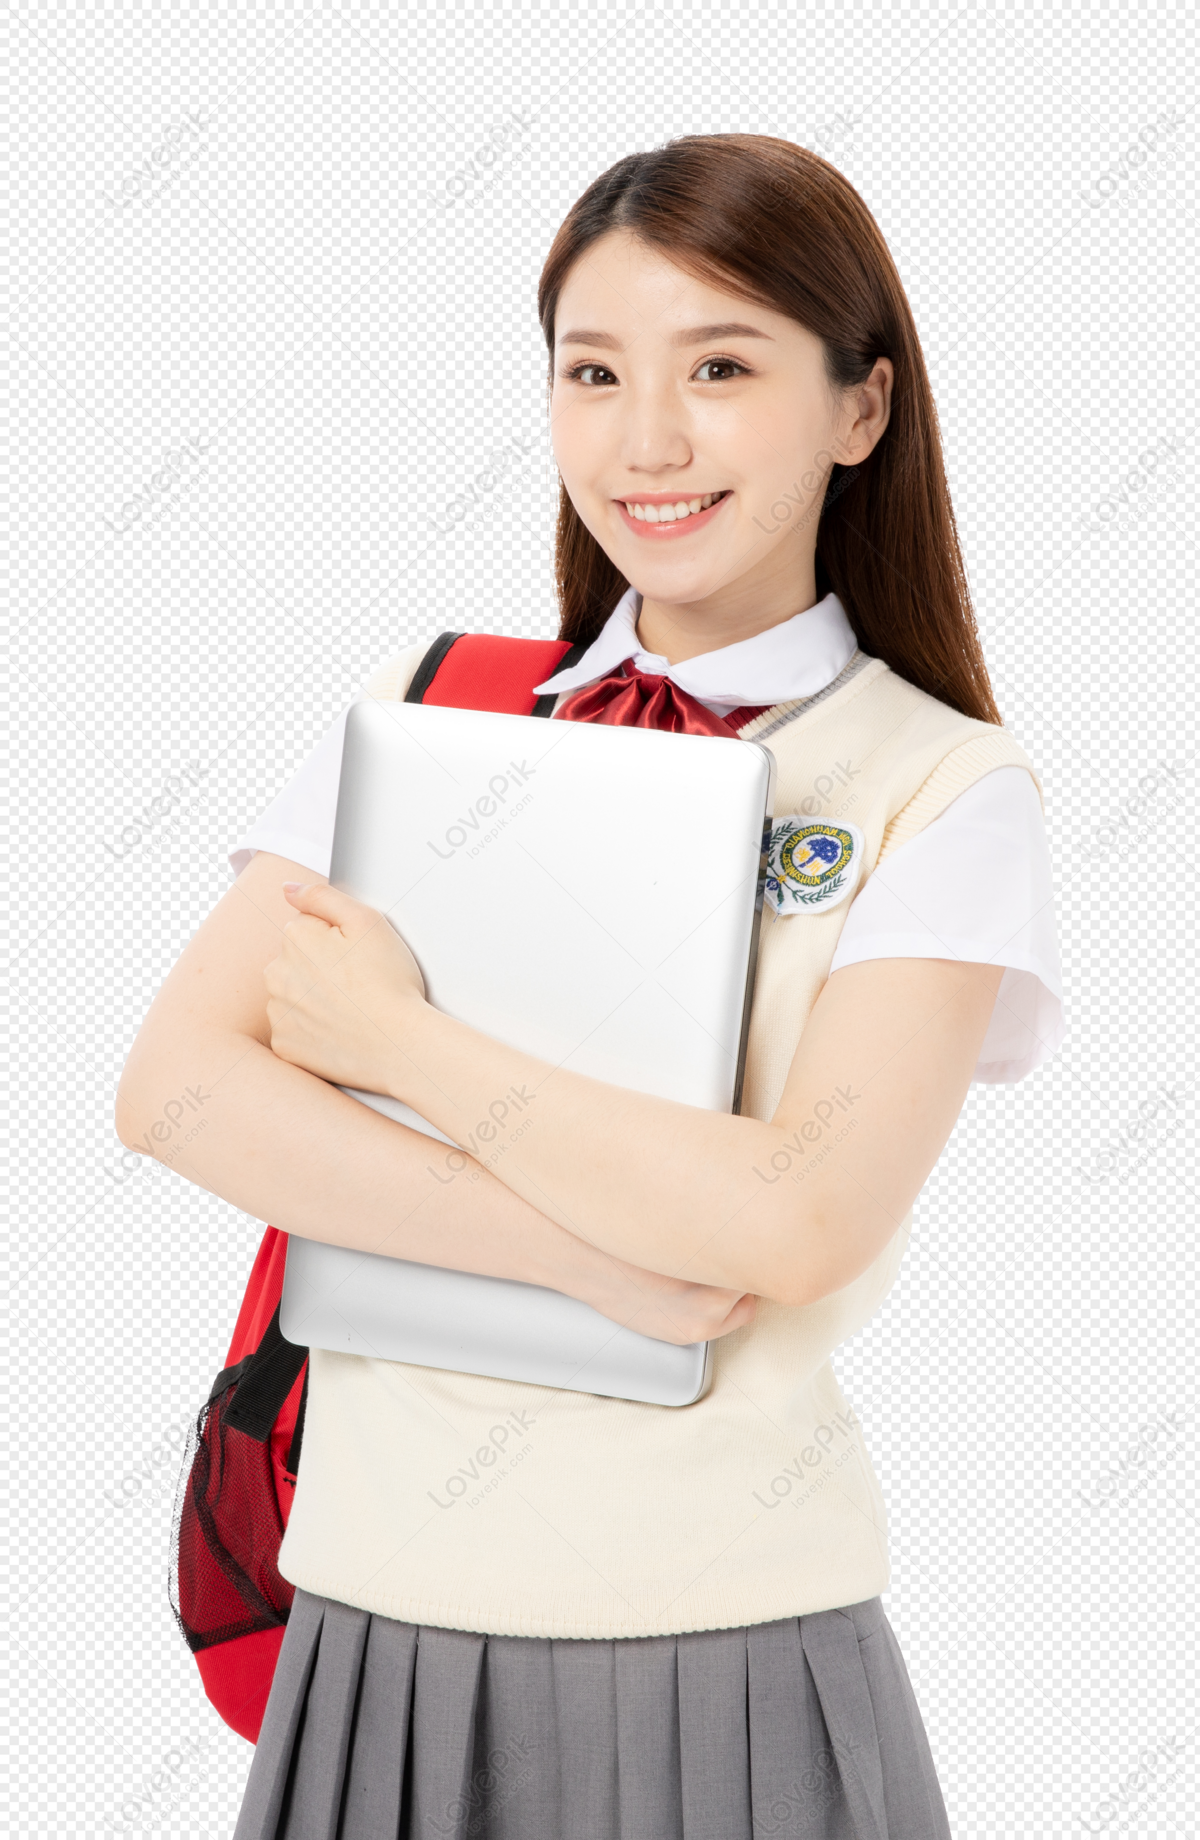 Image of female high school students, youth life, korean student, school woman png free download